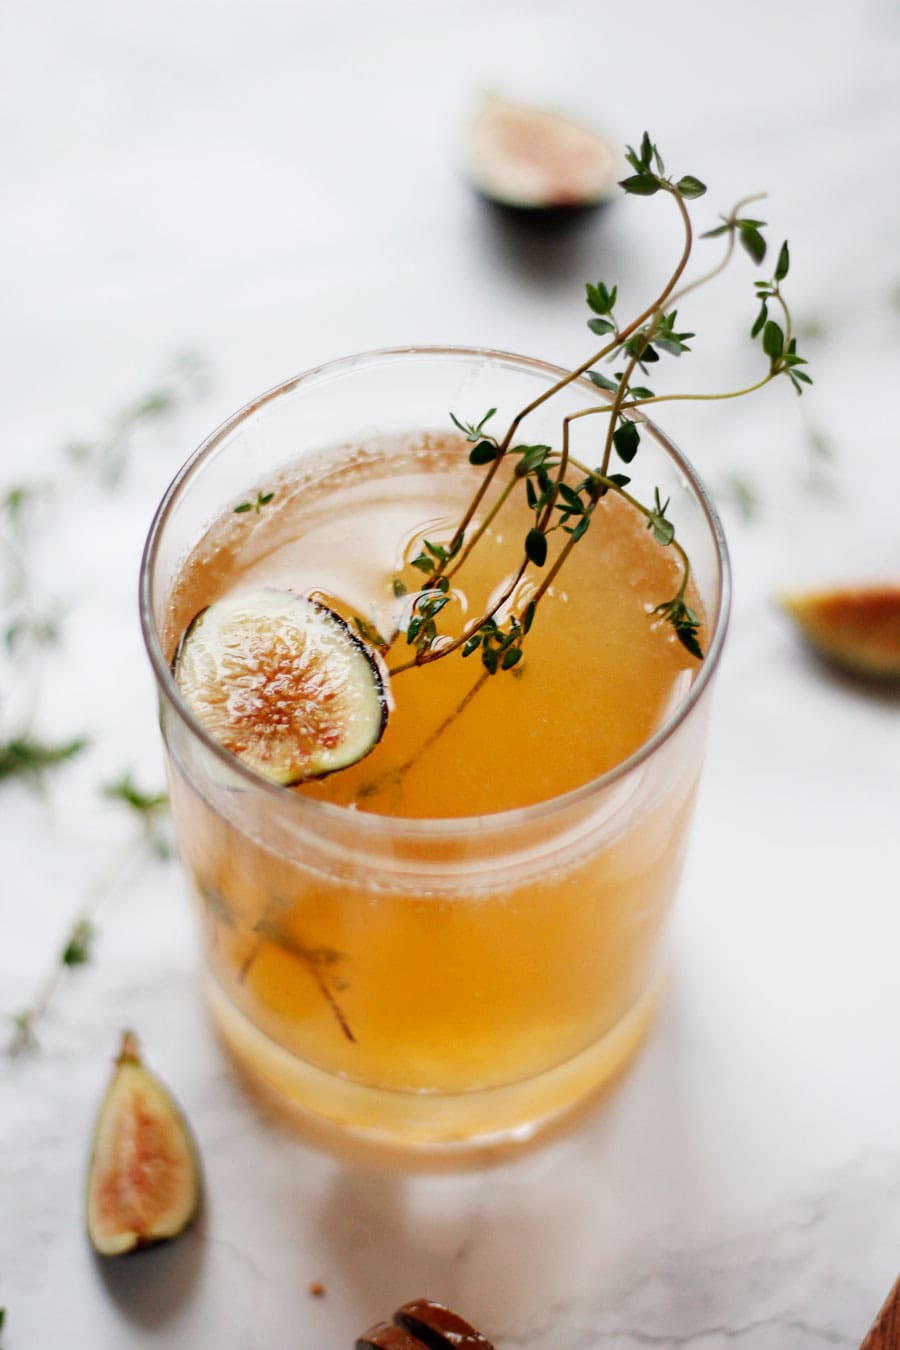 This sparkling fig thyme cocktail is perfect for your upcoming engagement party, bridal shower or winter wedding